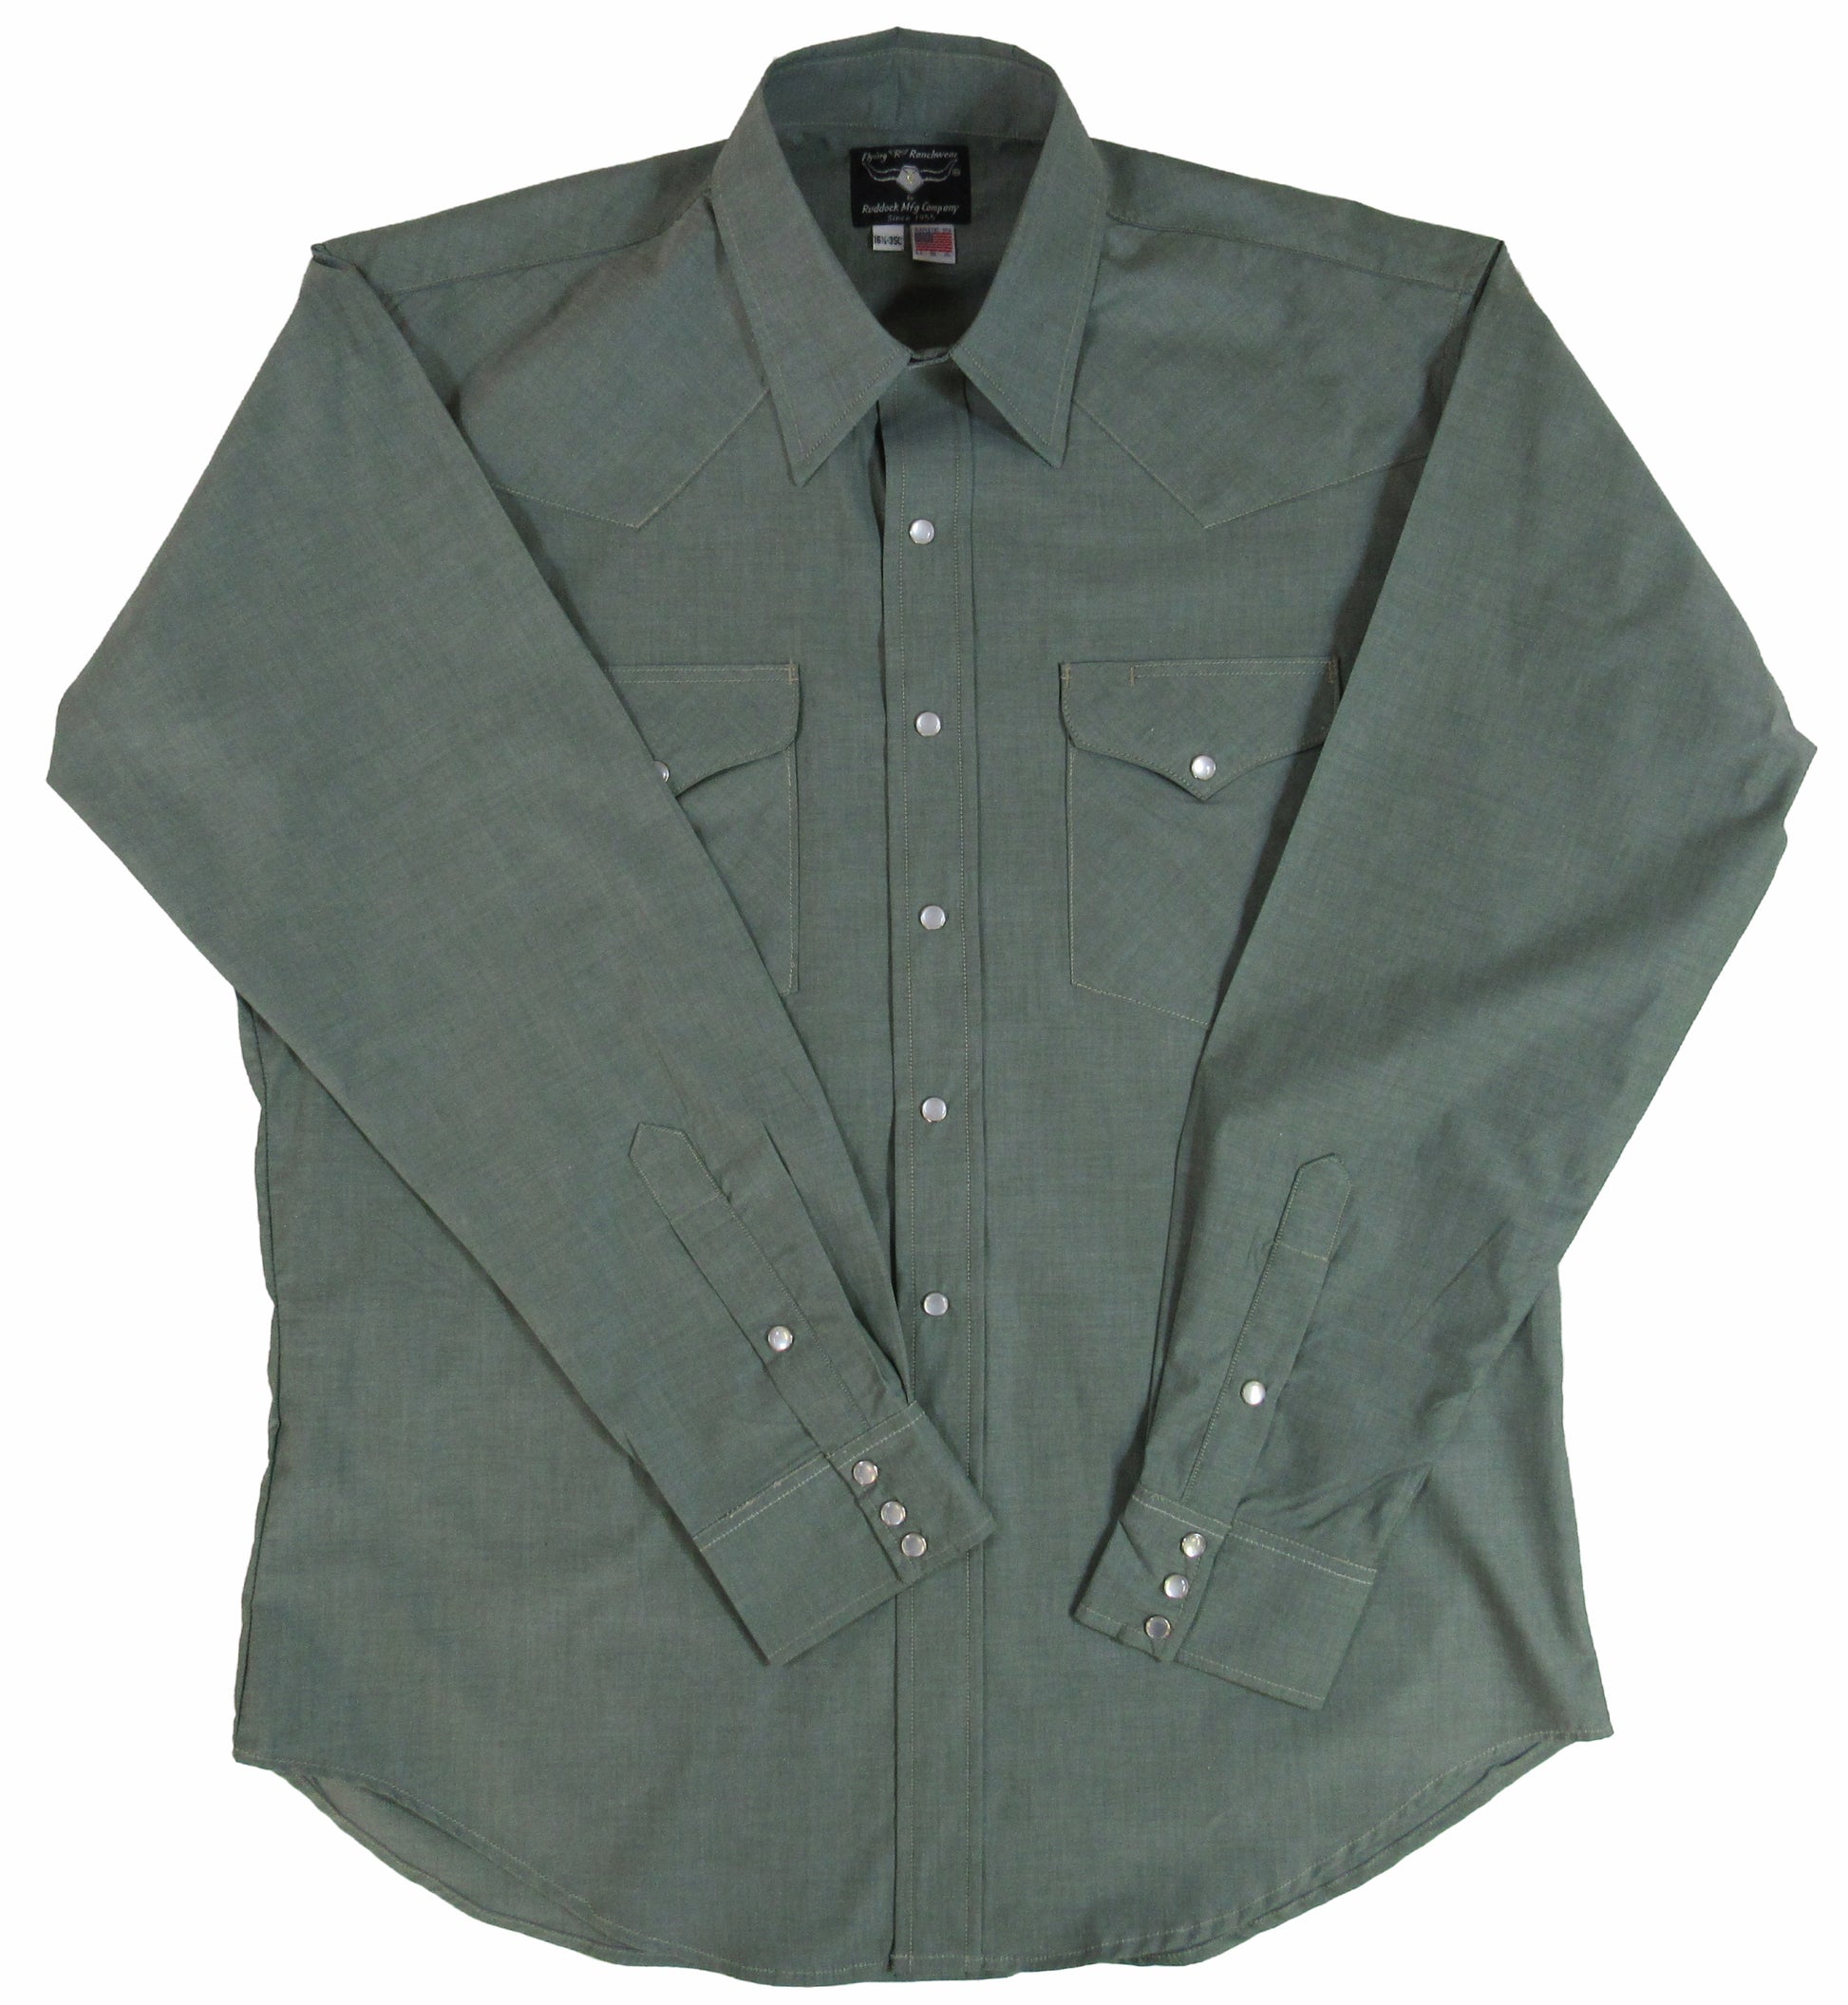 Sierra Chambray by Flying R Ranchwear in Forest green with snaps made in USA